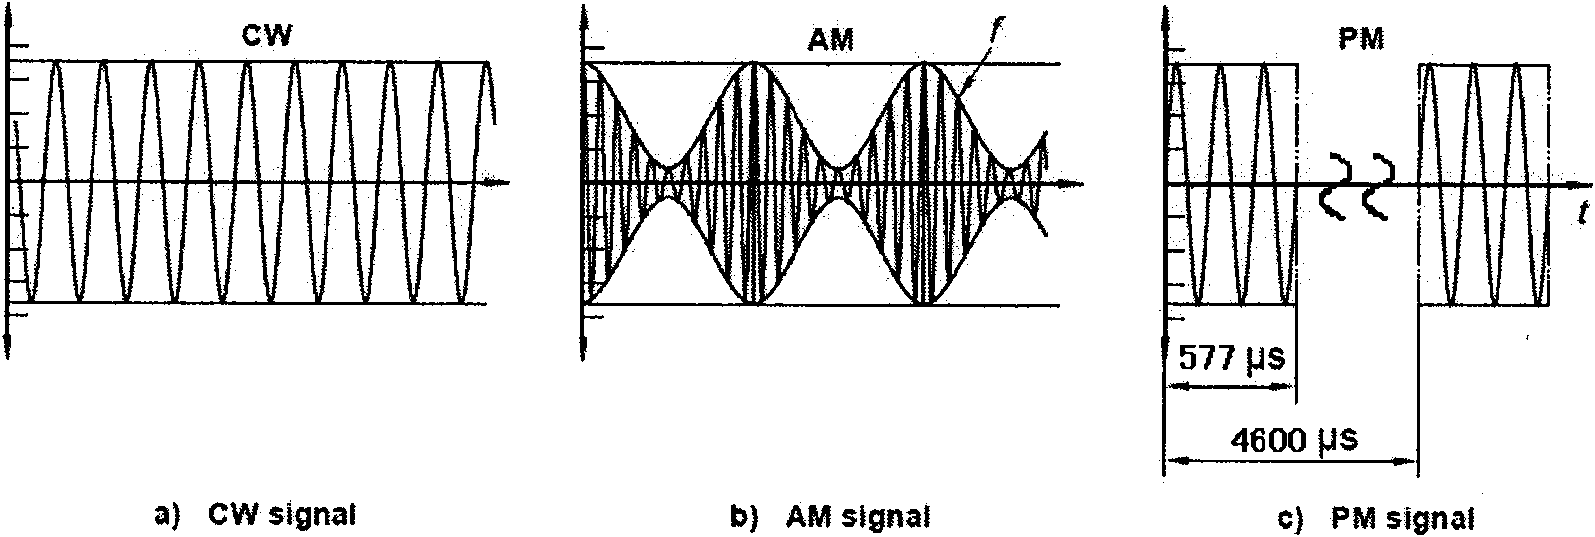 Method for testing electromagnetic compatibility (EMC) of electrically-driven automobile